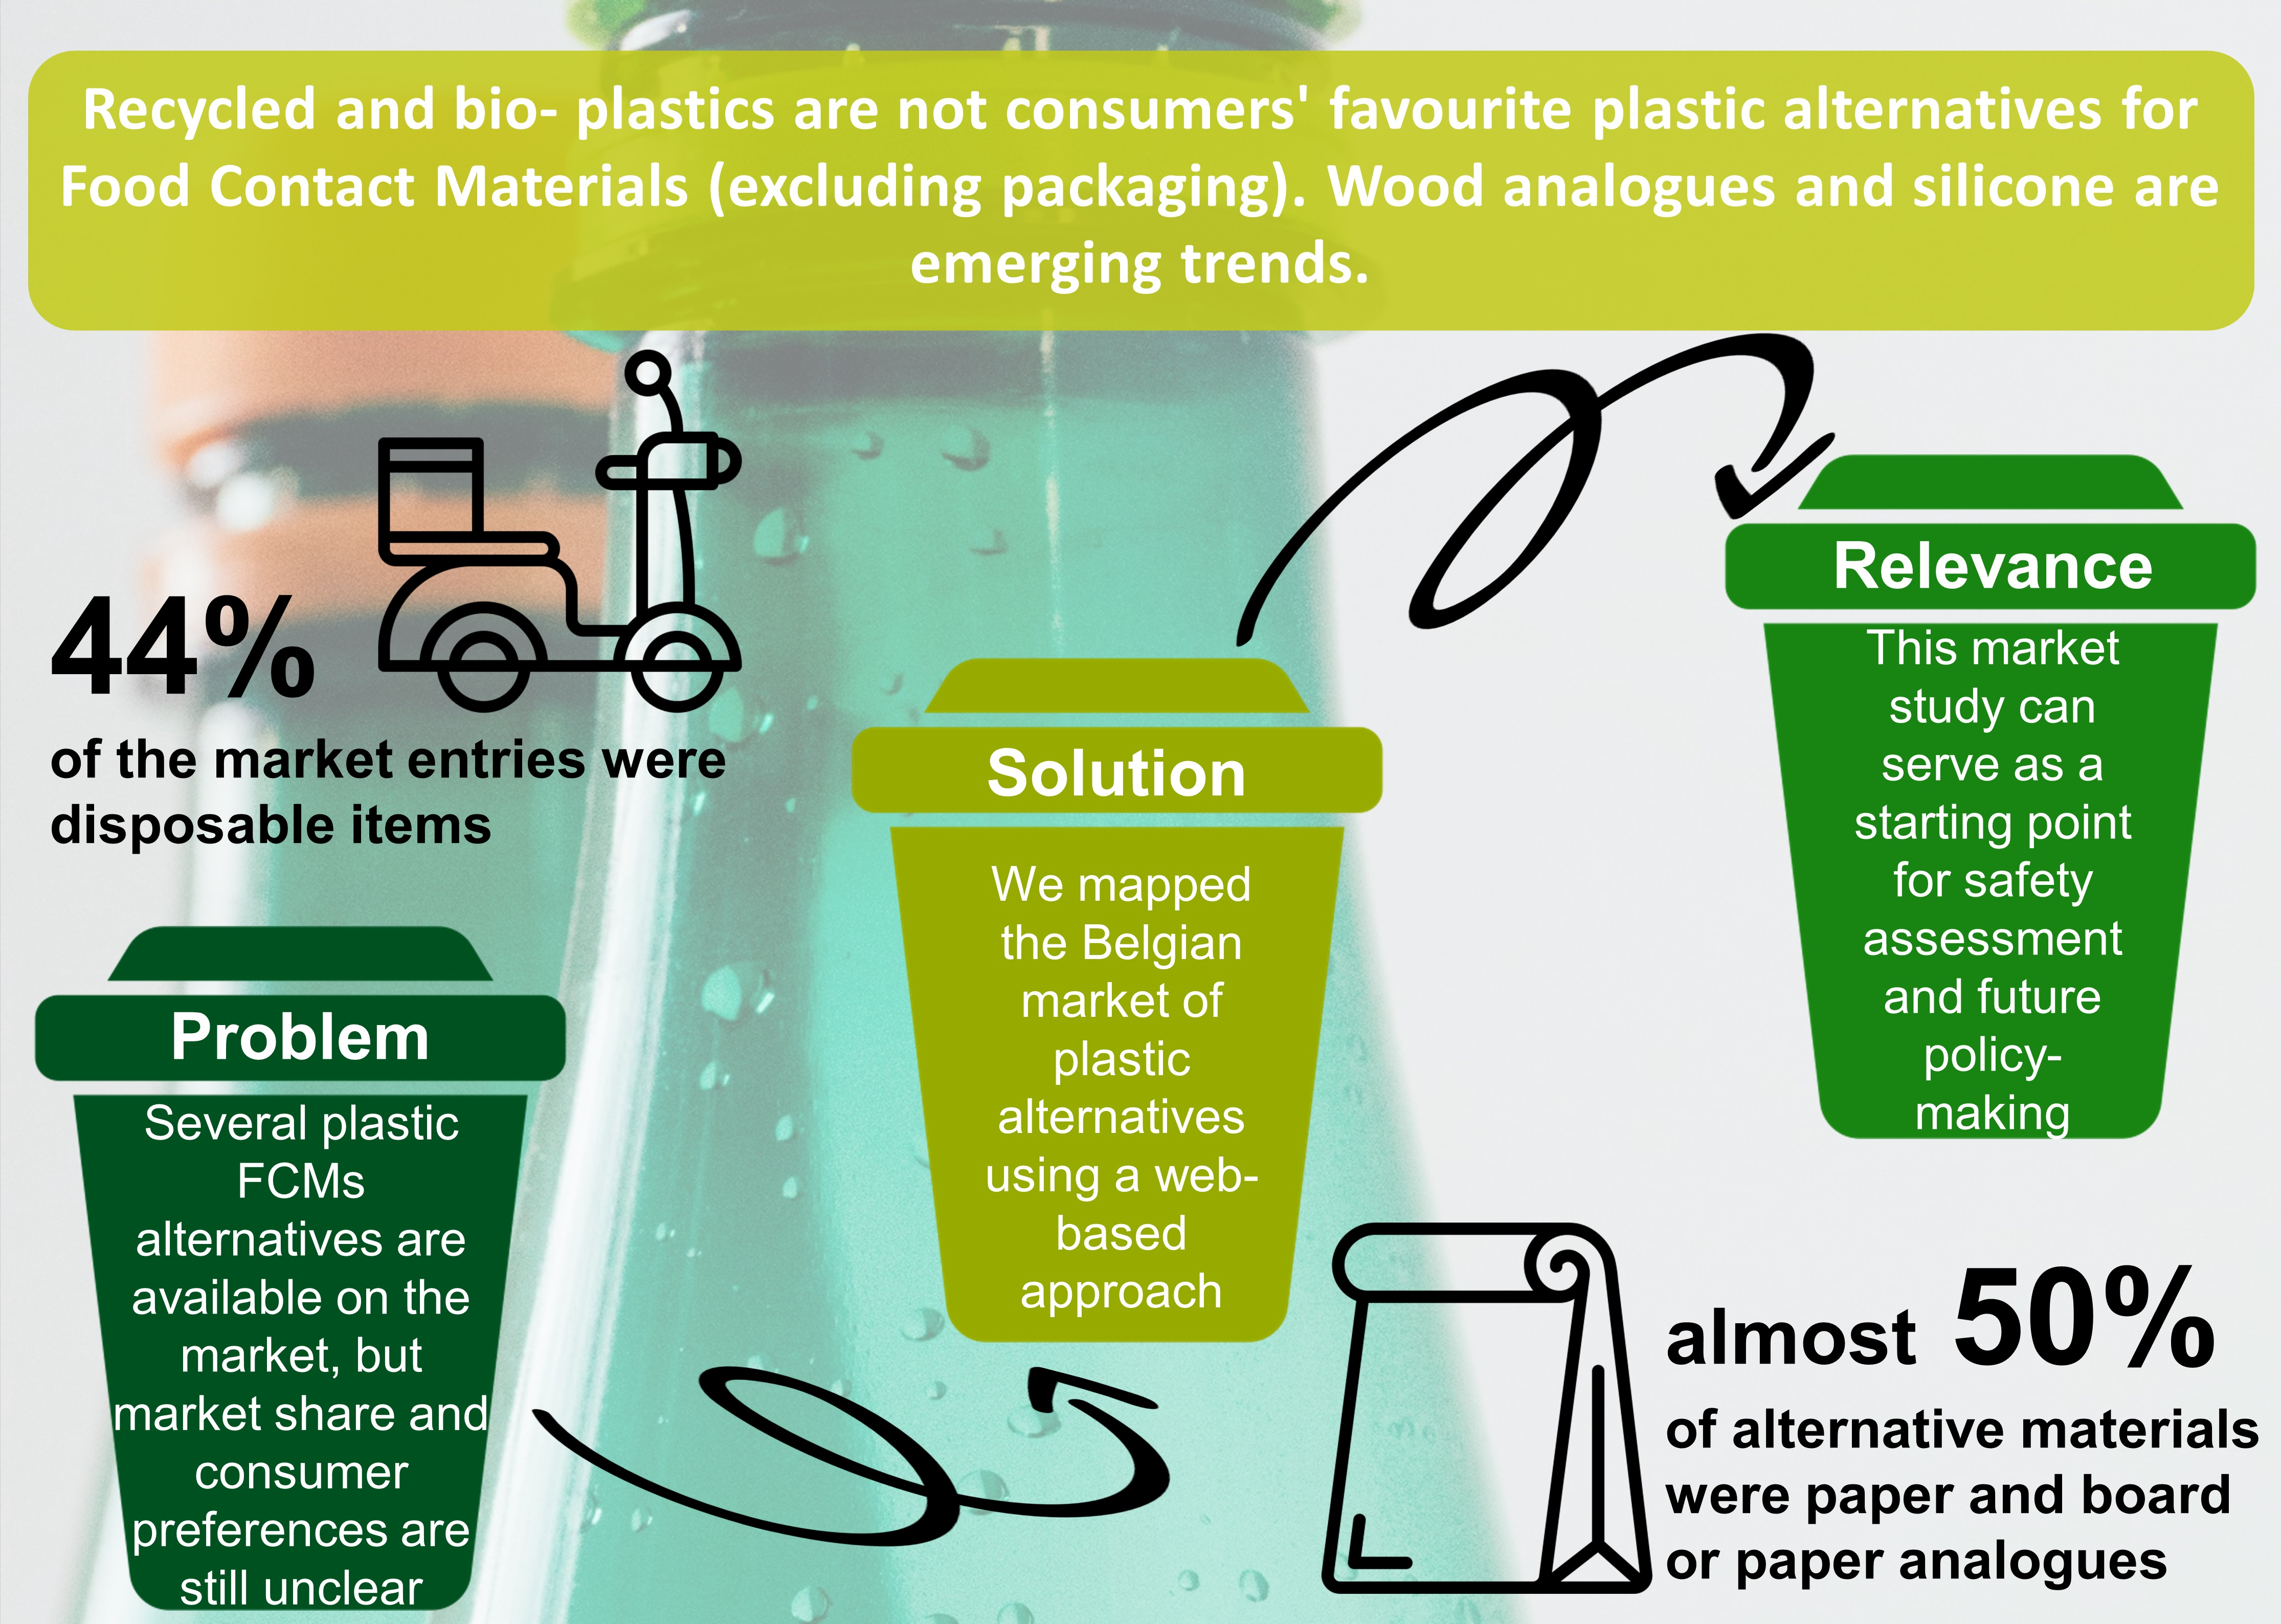 Is Silicone Eco-Friendly? - Environmental Impact Of Silicone